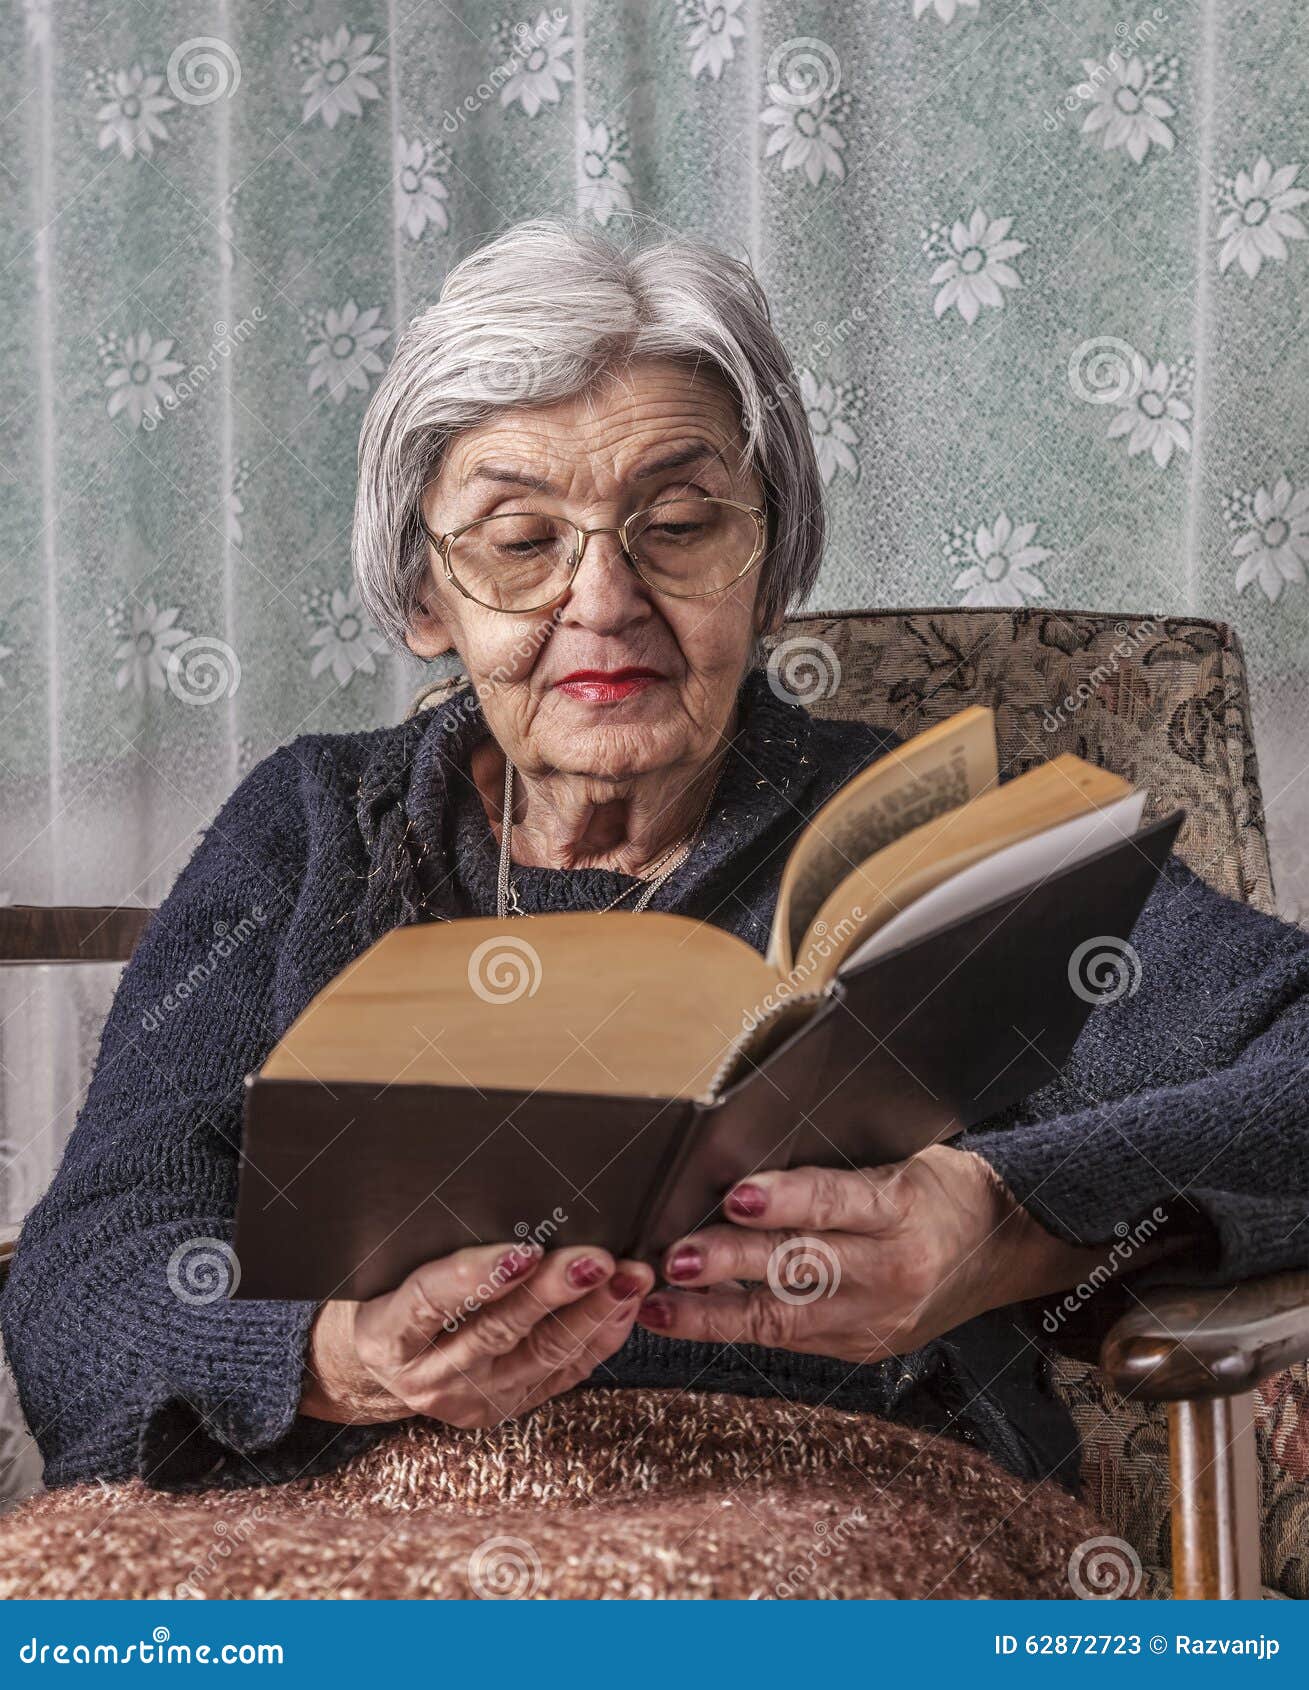 portrait of an old woman reading